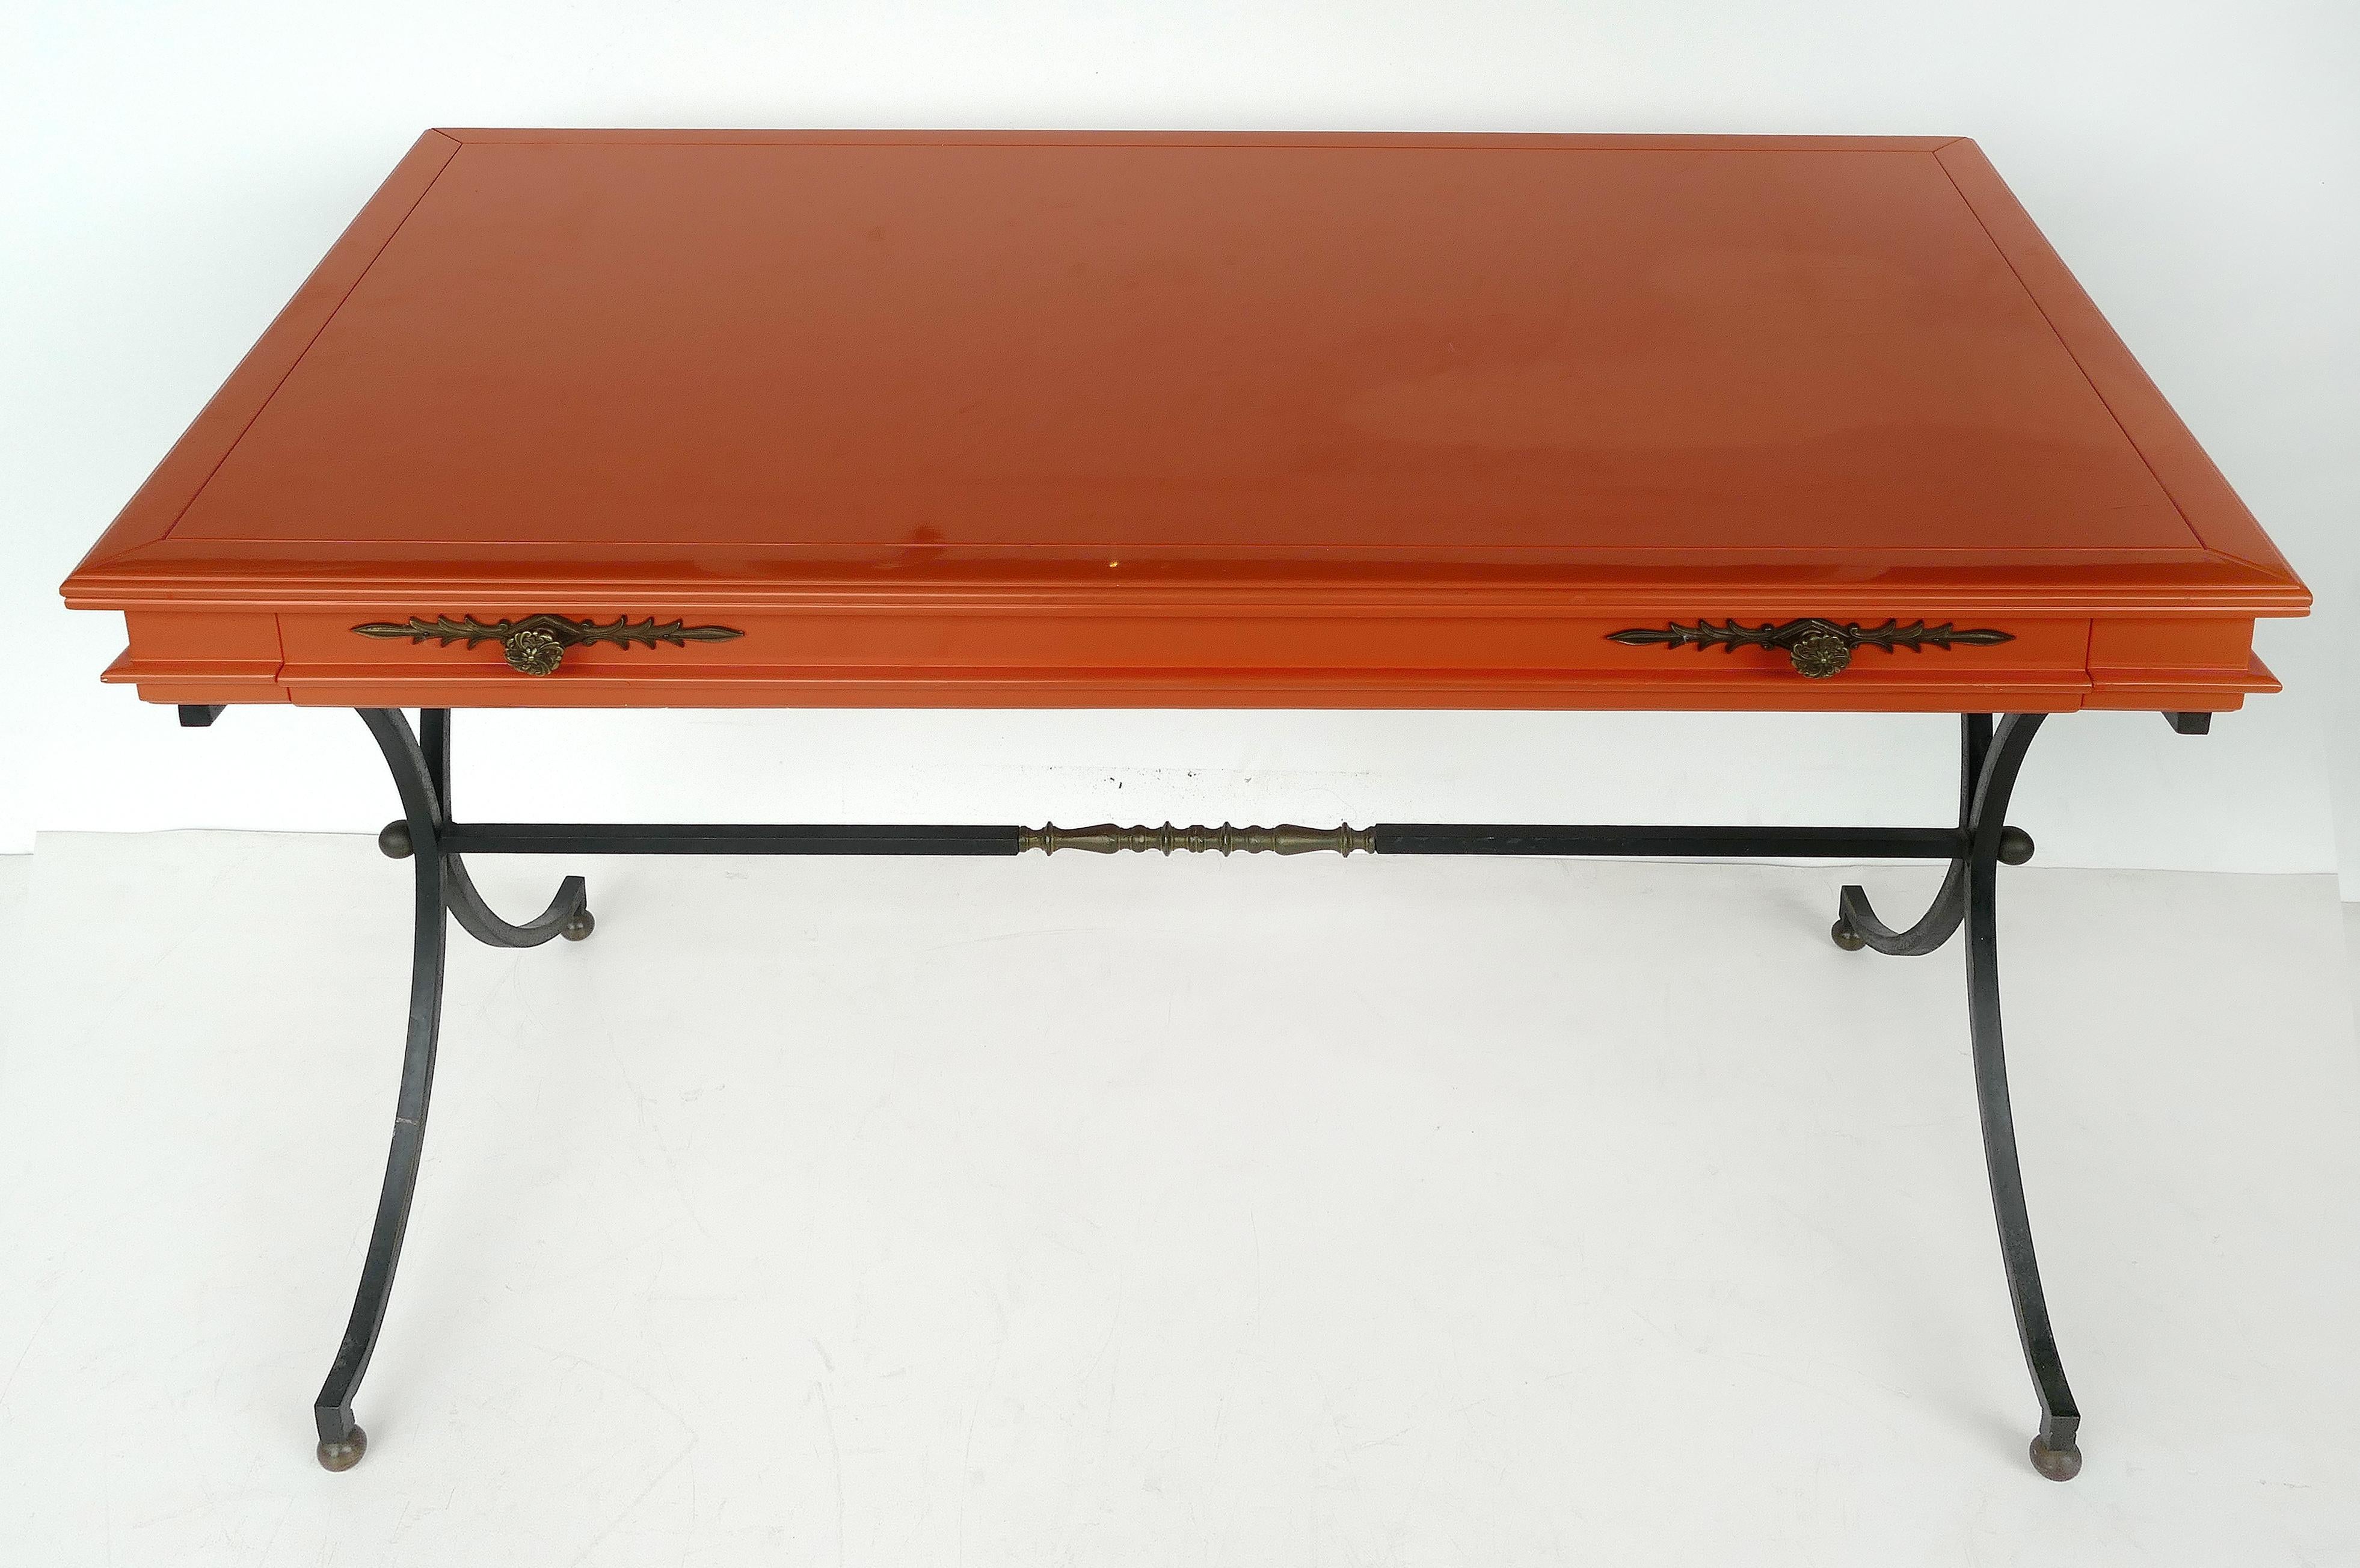 Lacquered Italian Orange Lacquer Wrought Iron Desk and Chair Set